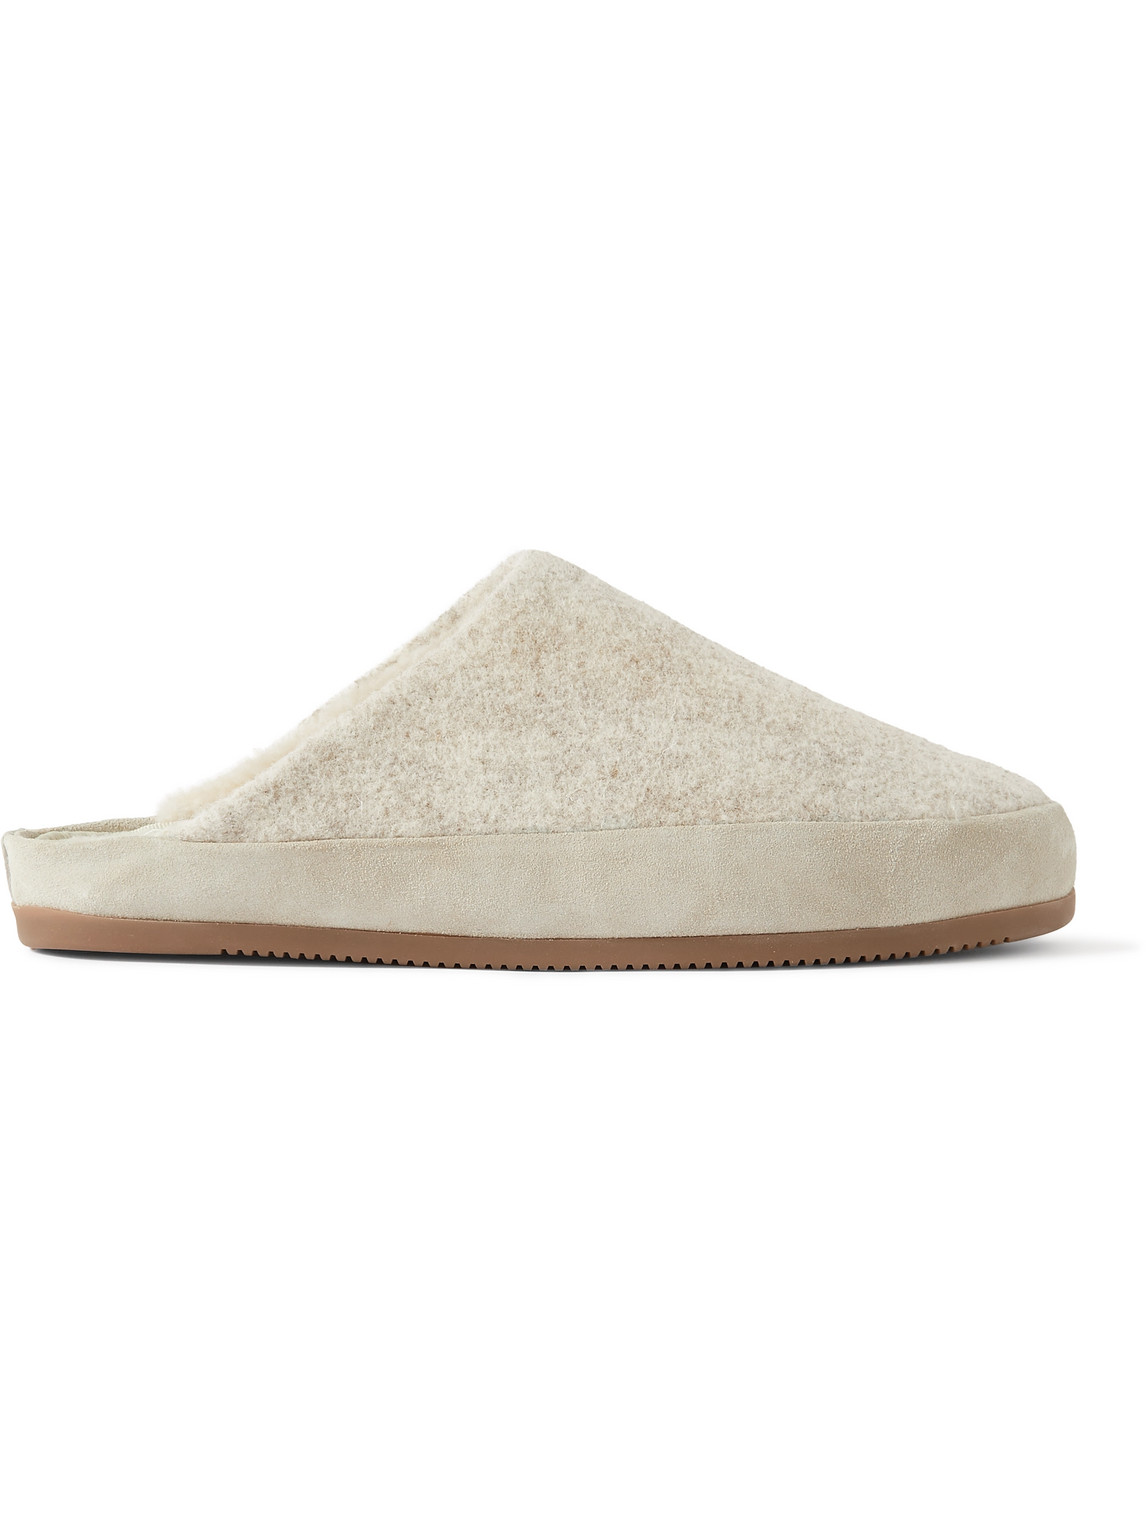 Mulo - Suede-Trimmed Shearling-Lined Recycled Wool Slippers - Men - White - UK 6 von Mulo